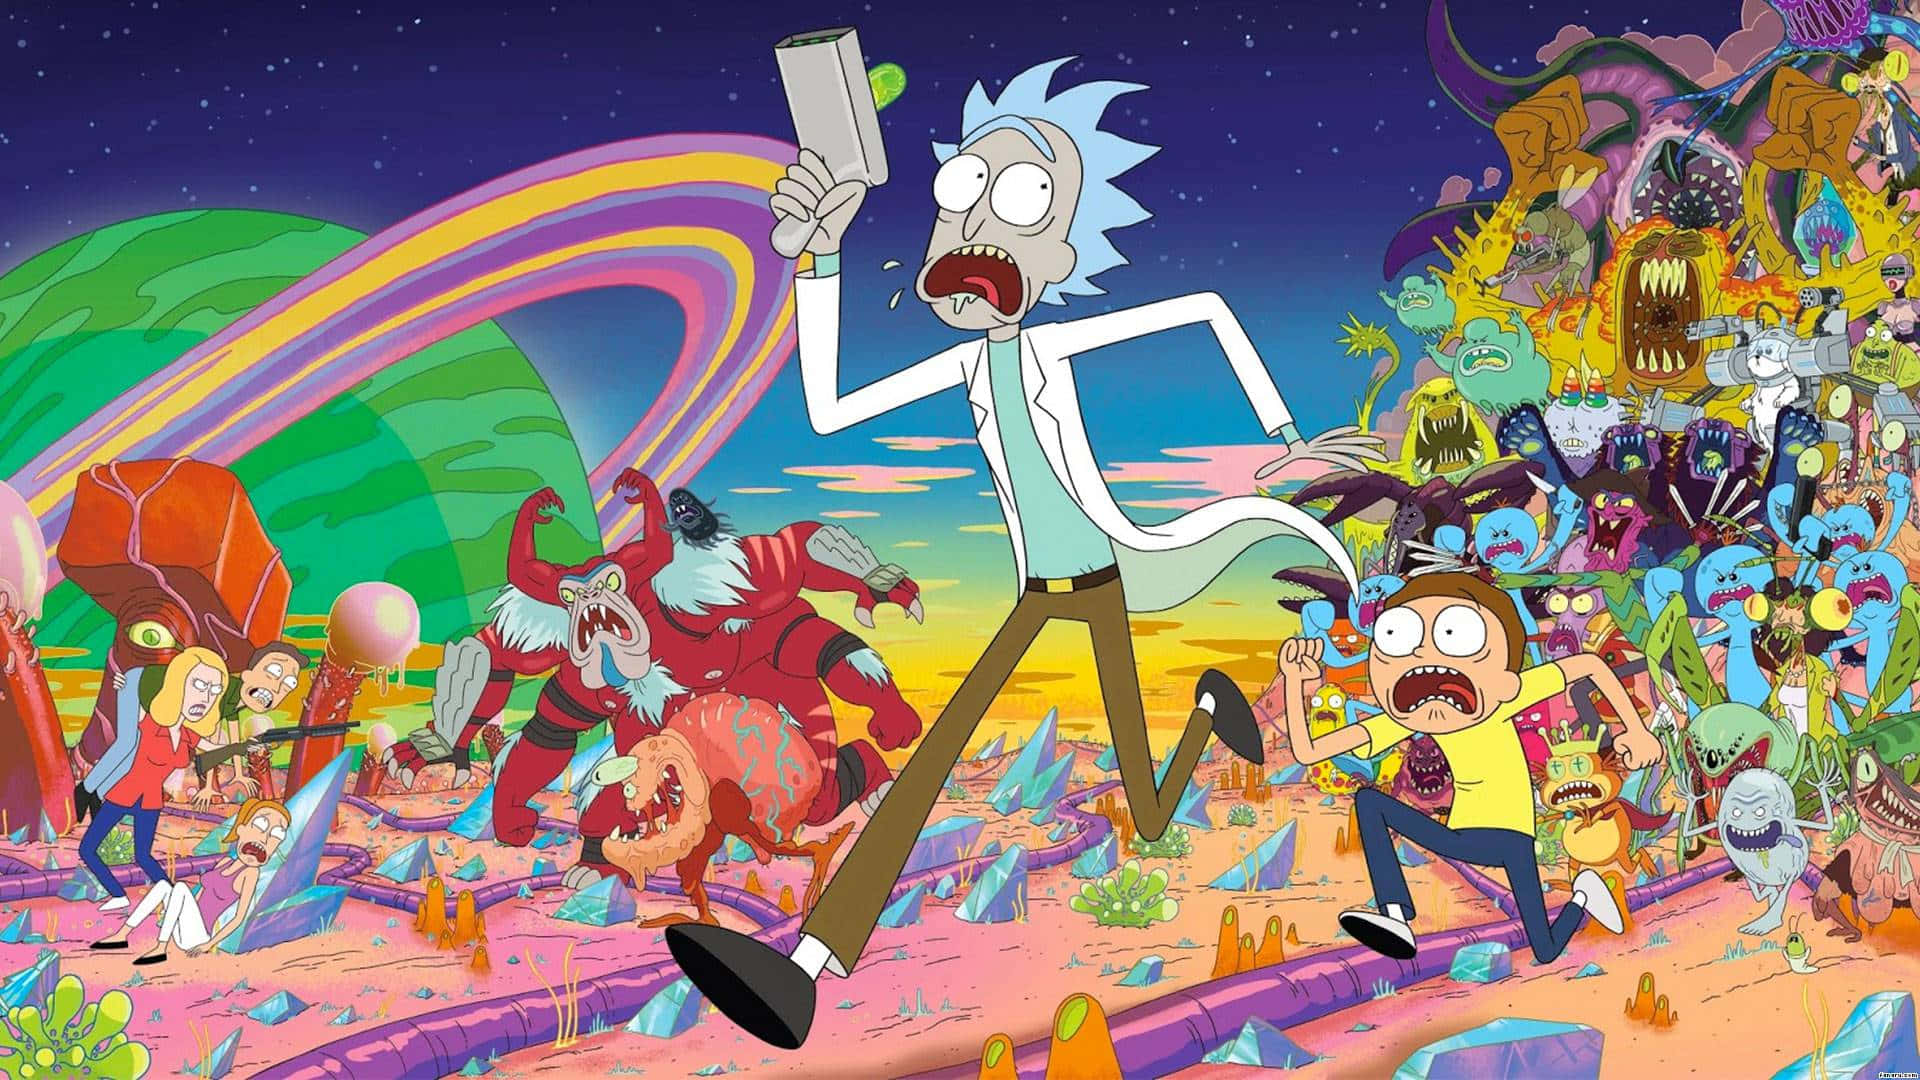 Colorful Rick and Morty fan art Wallpaper